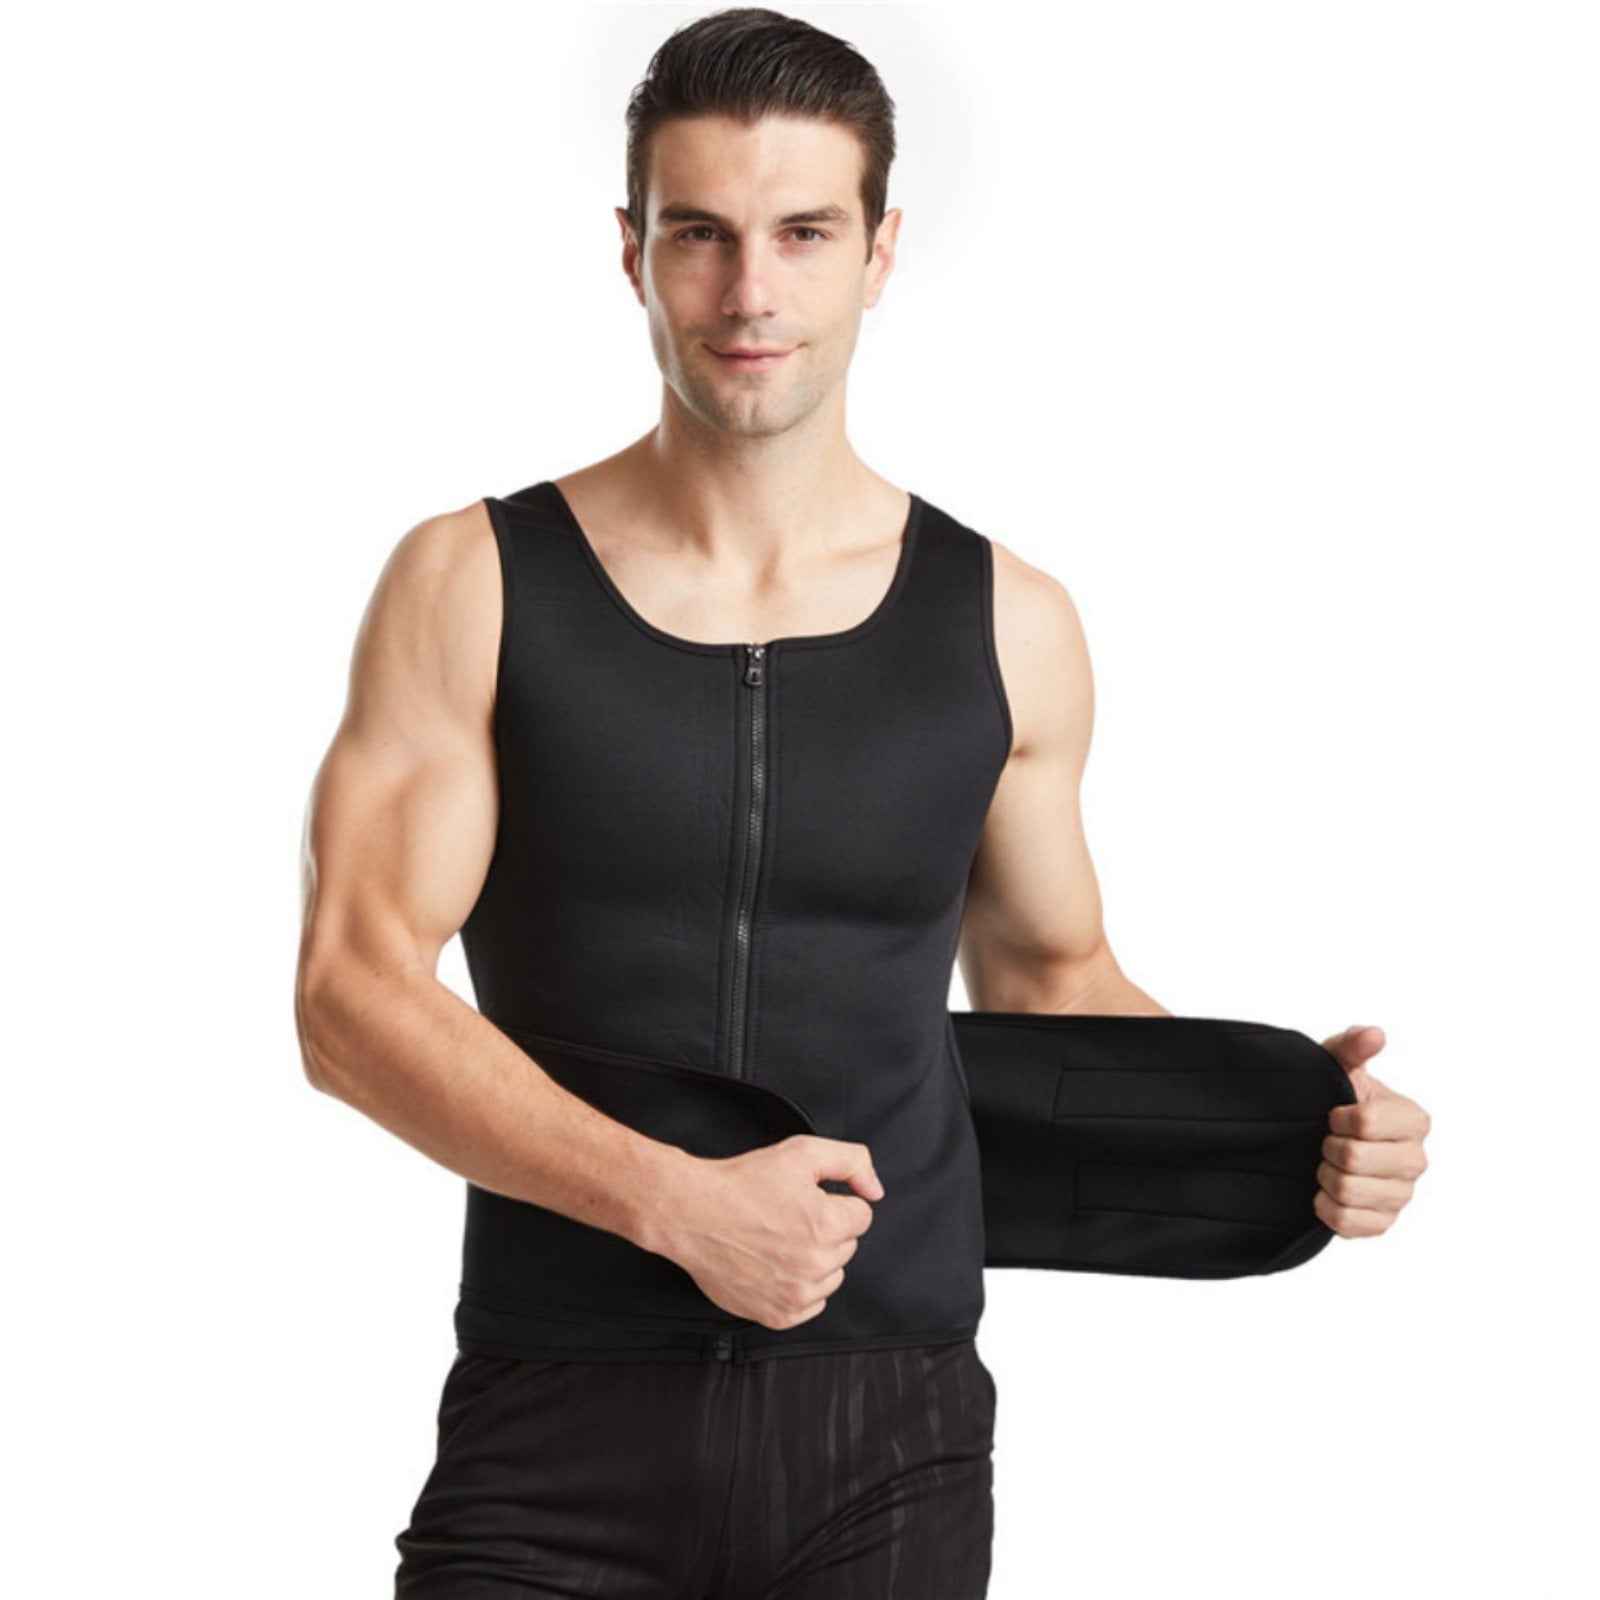 Body Top Shapewear Workout Tank Top for Running Hot Neoprene Corset Men Sauna Sweat Vest for Weight Loss Exercise Suit of Fat Burner Slimming Shirt Waist Trainer Jogging and Weightlifting